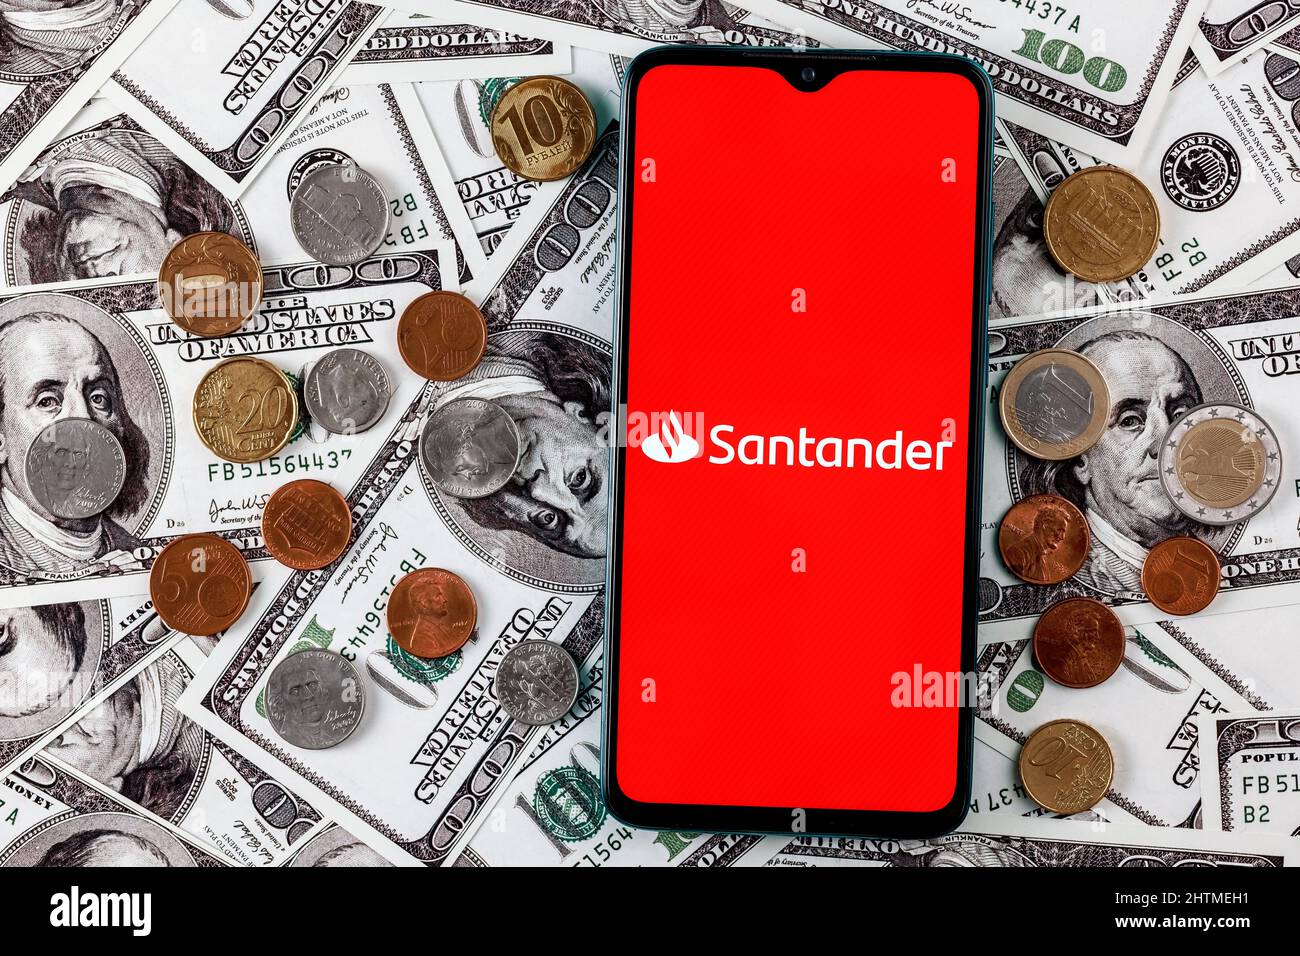 Smartphone with Santander bank logo surrounded by variety of metal coins on background of dollar bills Stock Photo